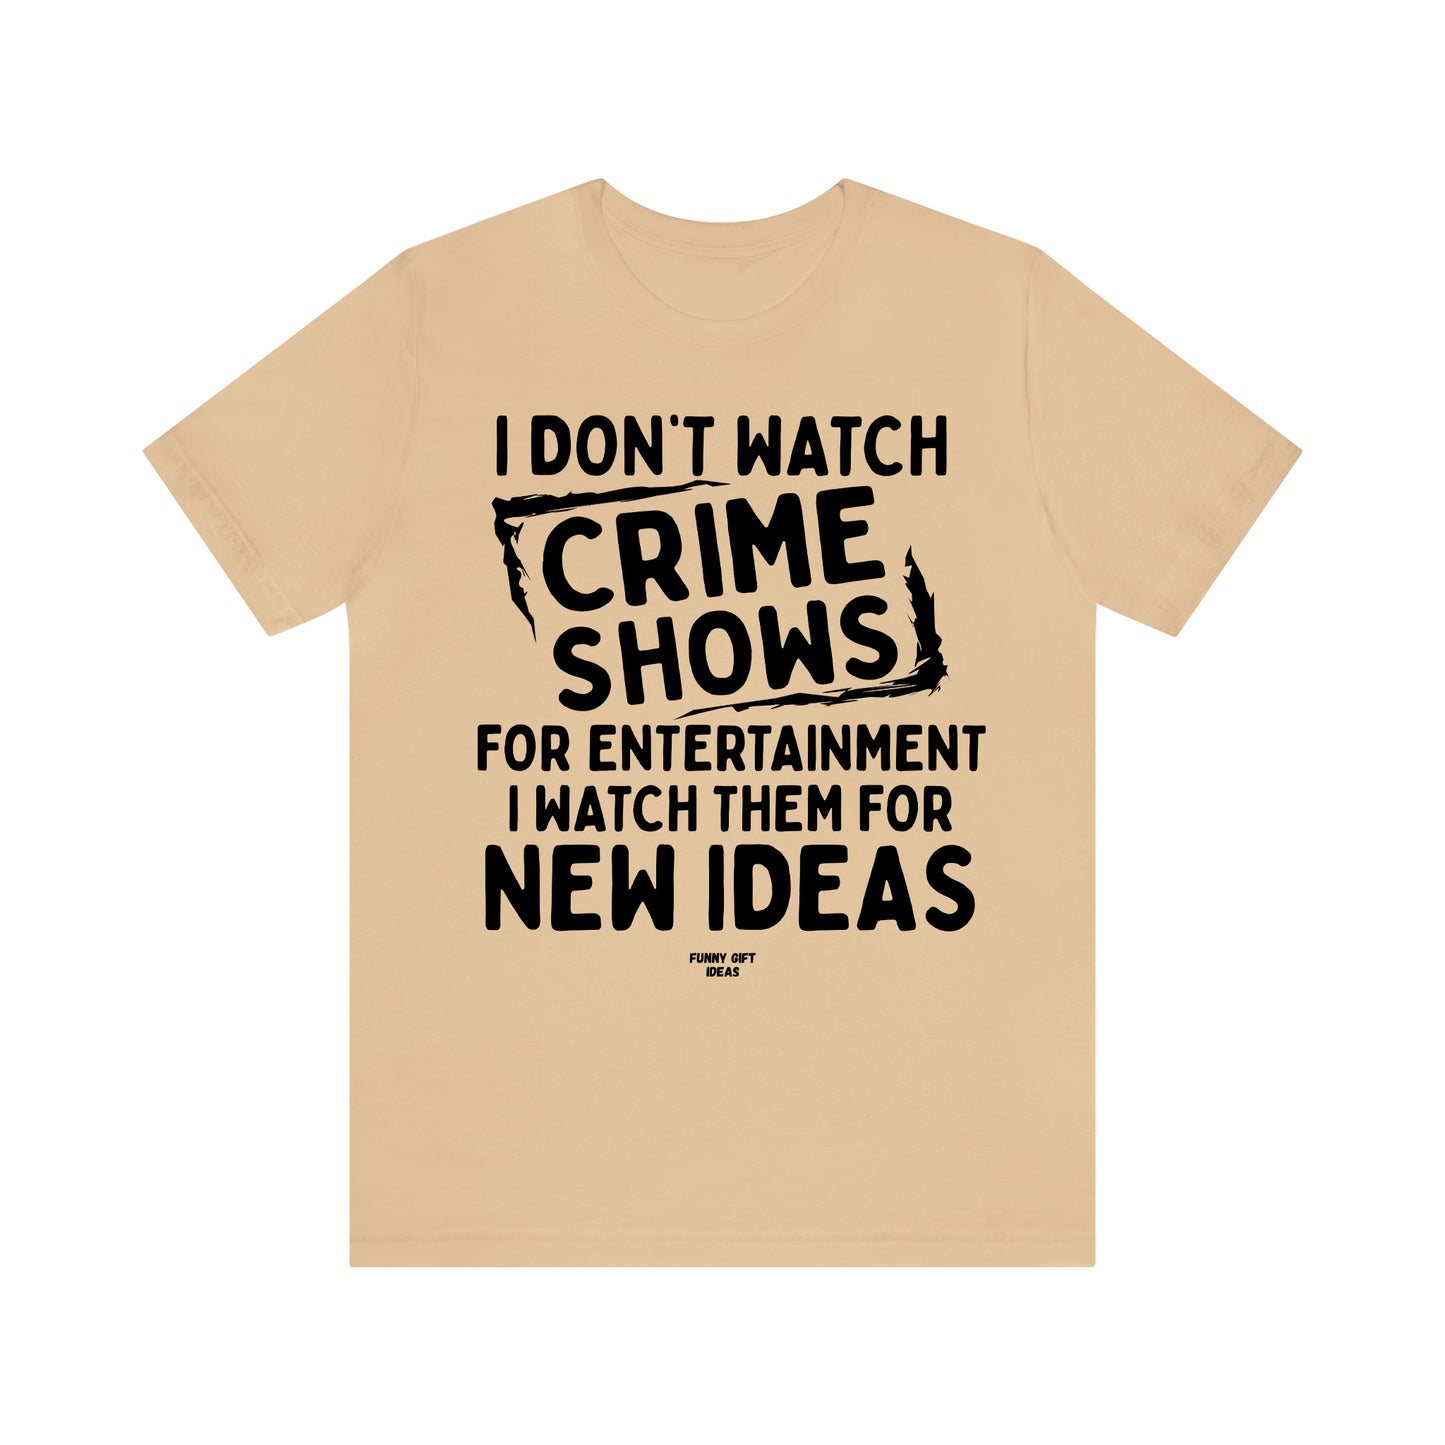 Funny Shirts for Women - I Don't Watch Crime Shows for Entertainment I Watch Them for New Ideas - Women's T Shirts